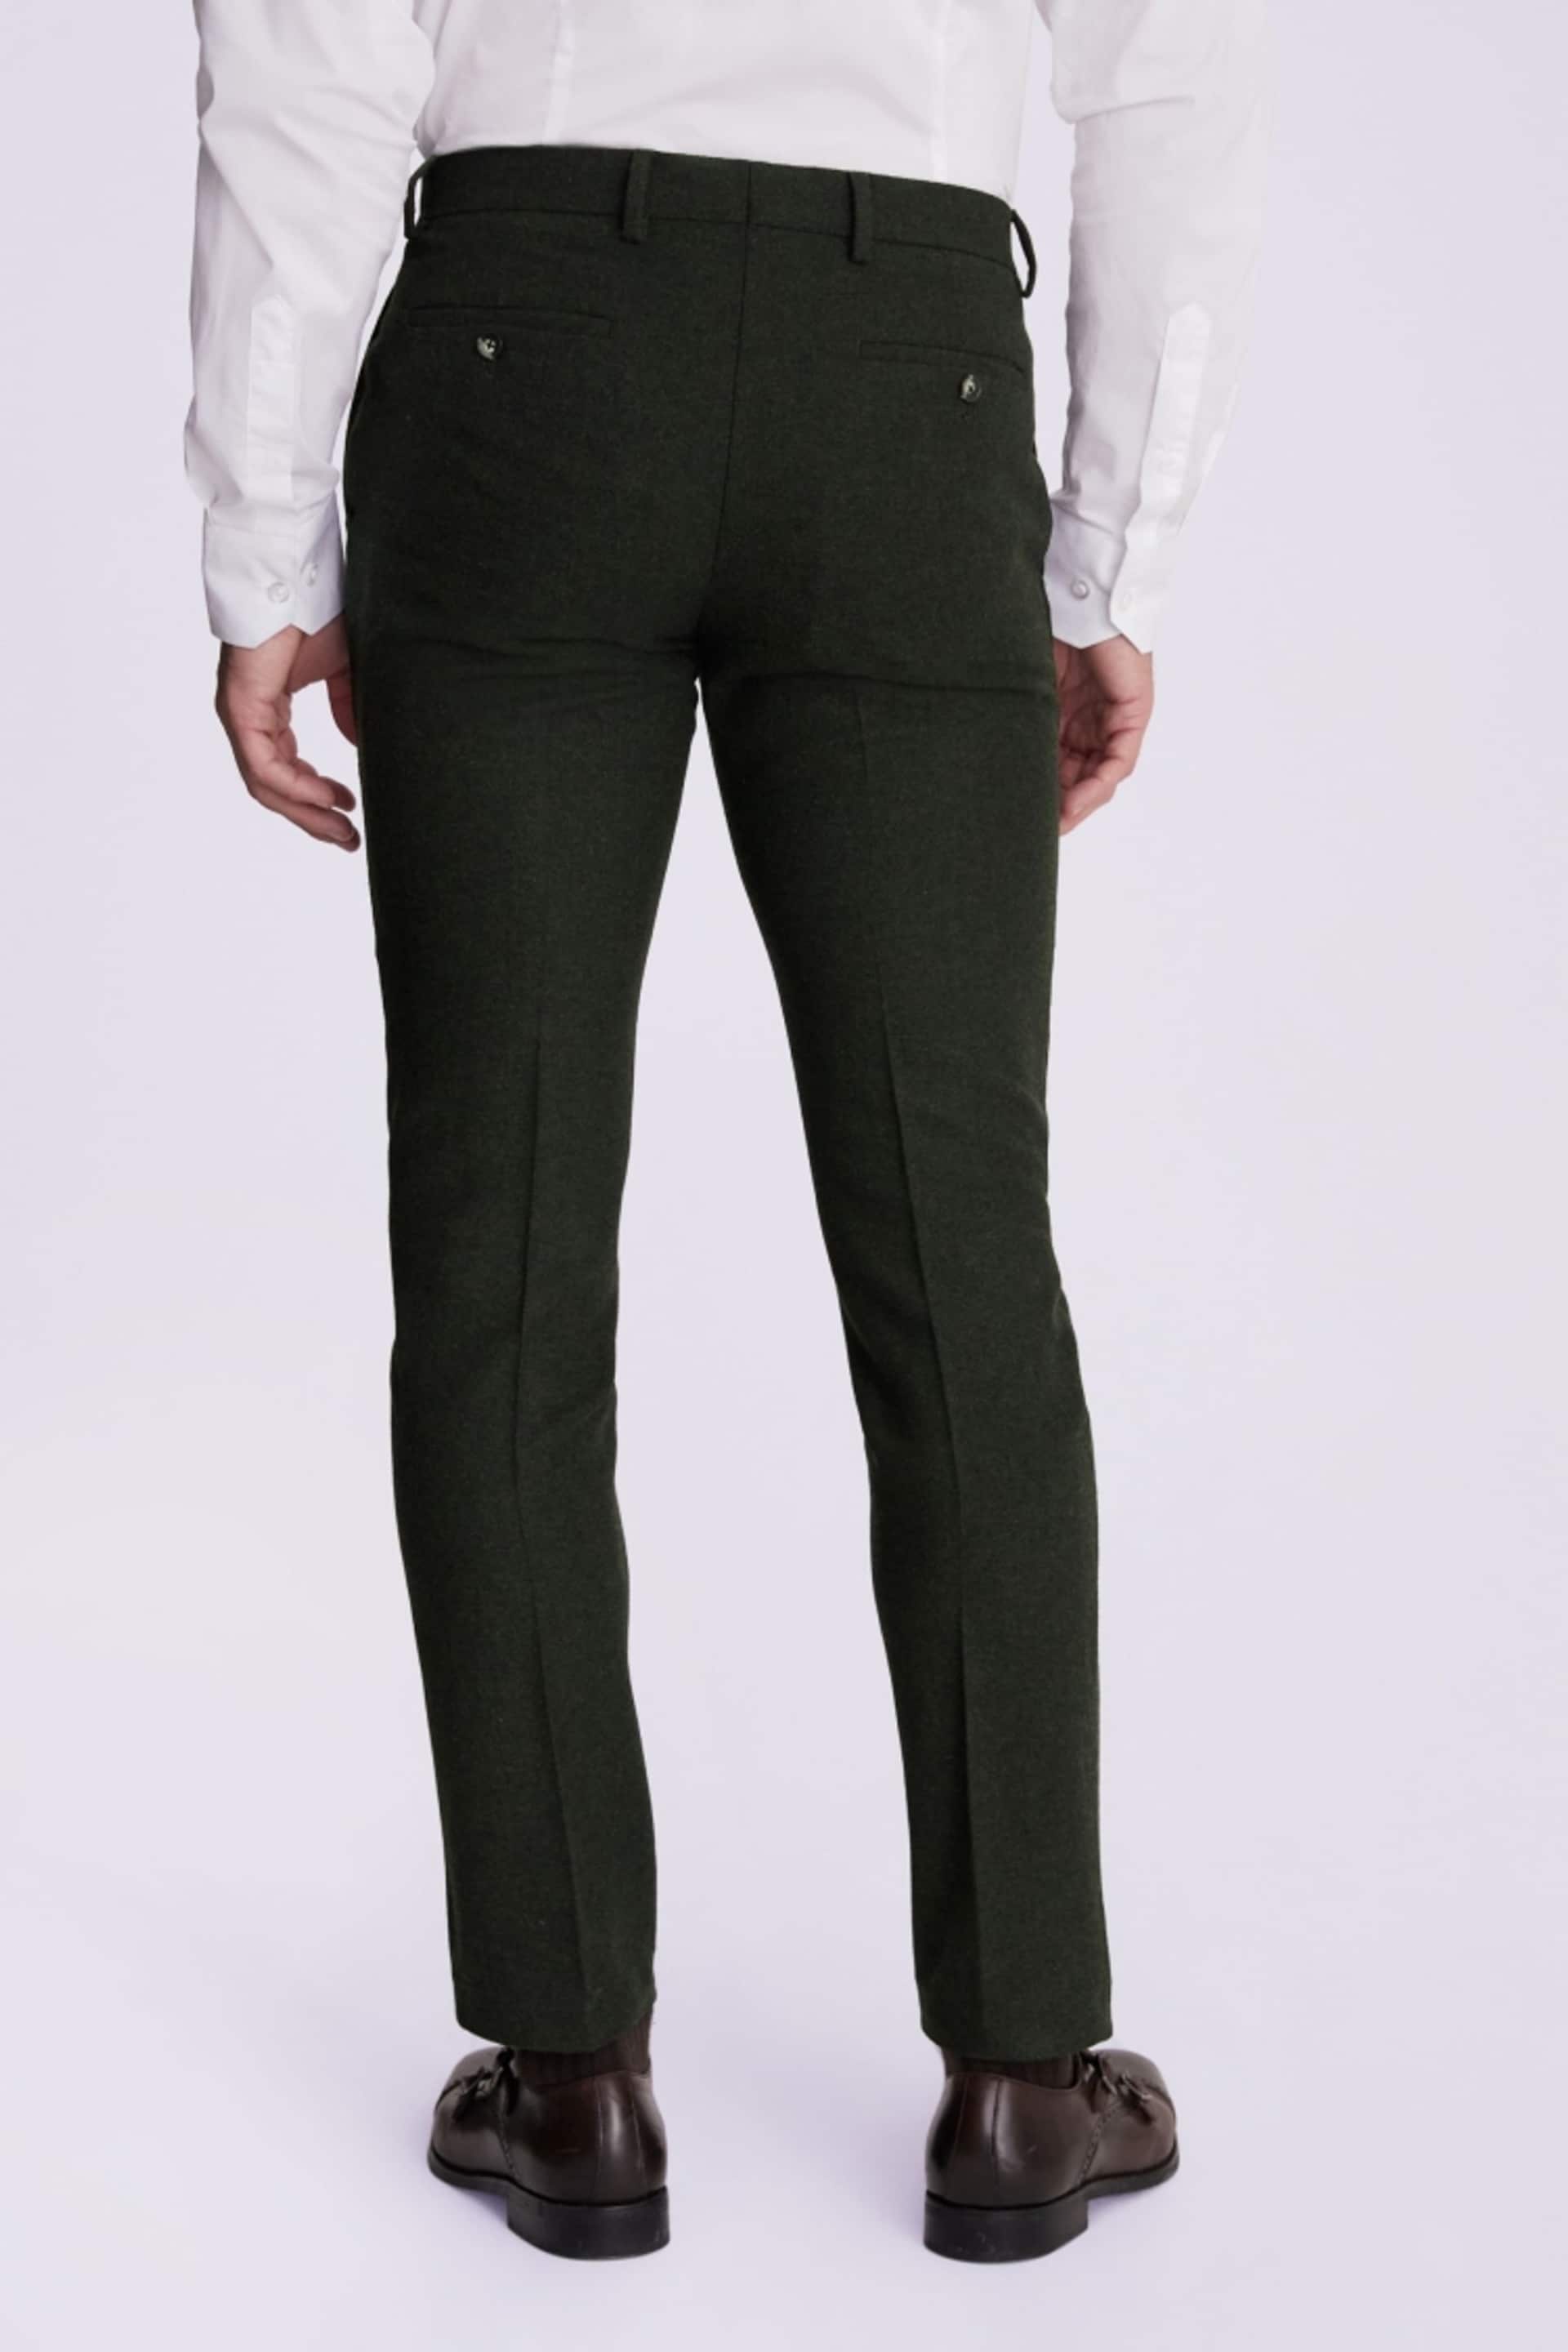 MOSS Khaki Green Slim Fit Donegal Suit Trousers - Image 2 of 3